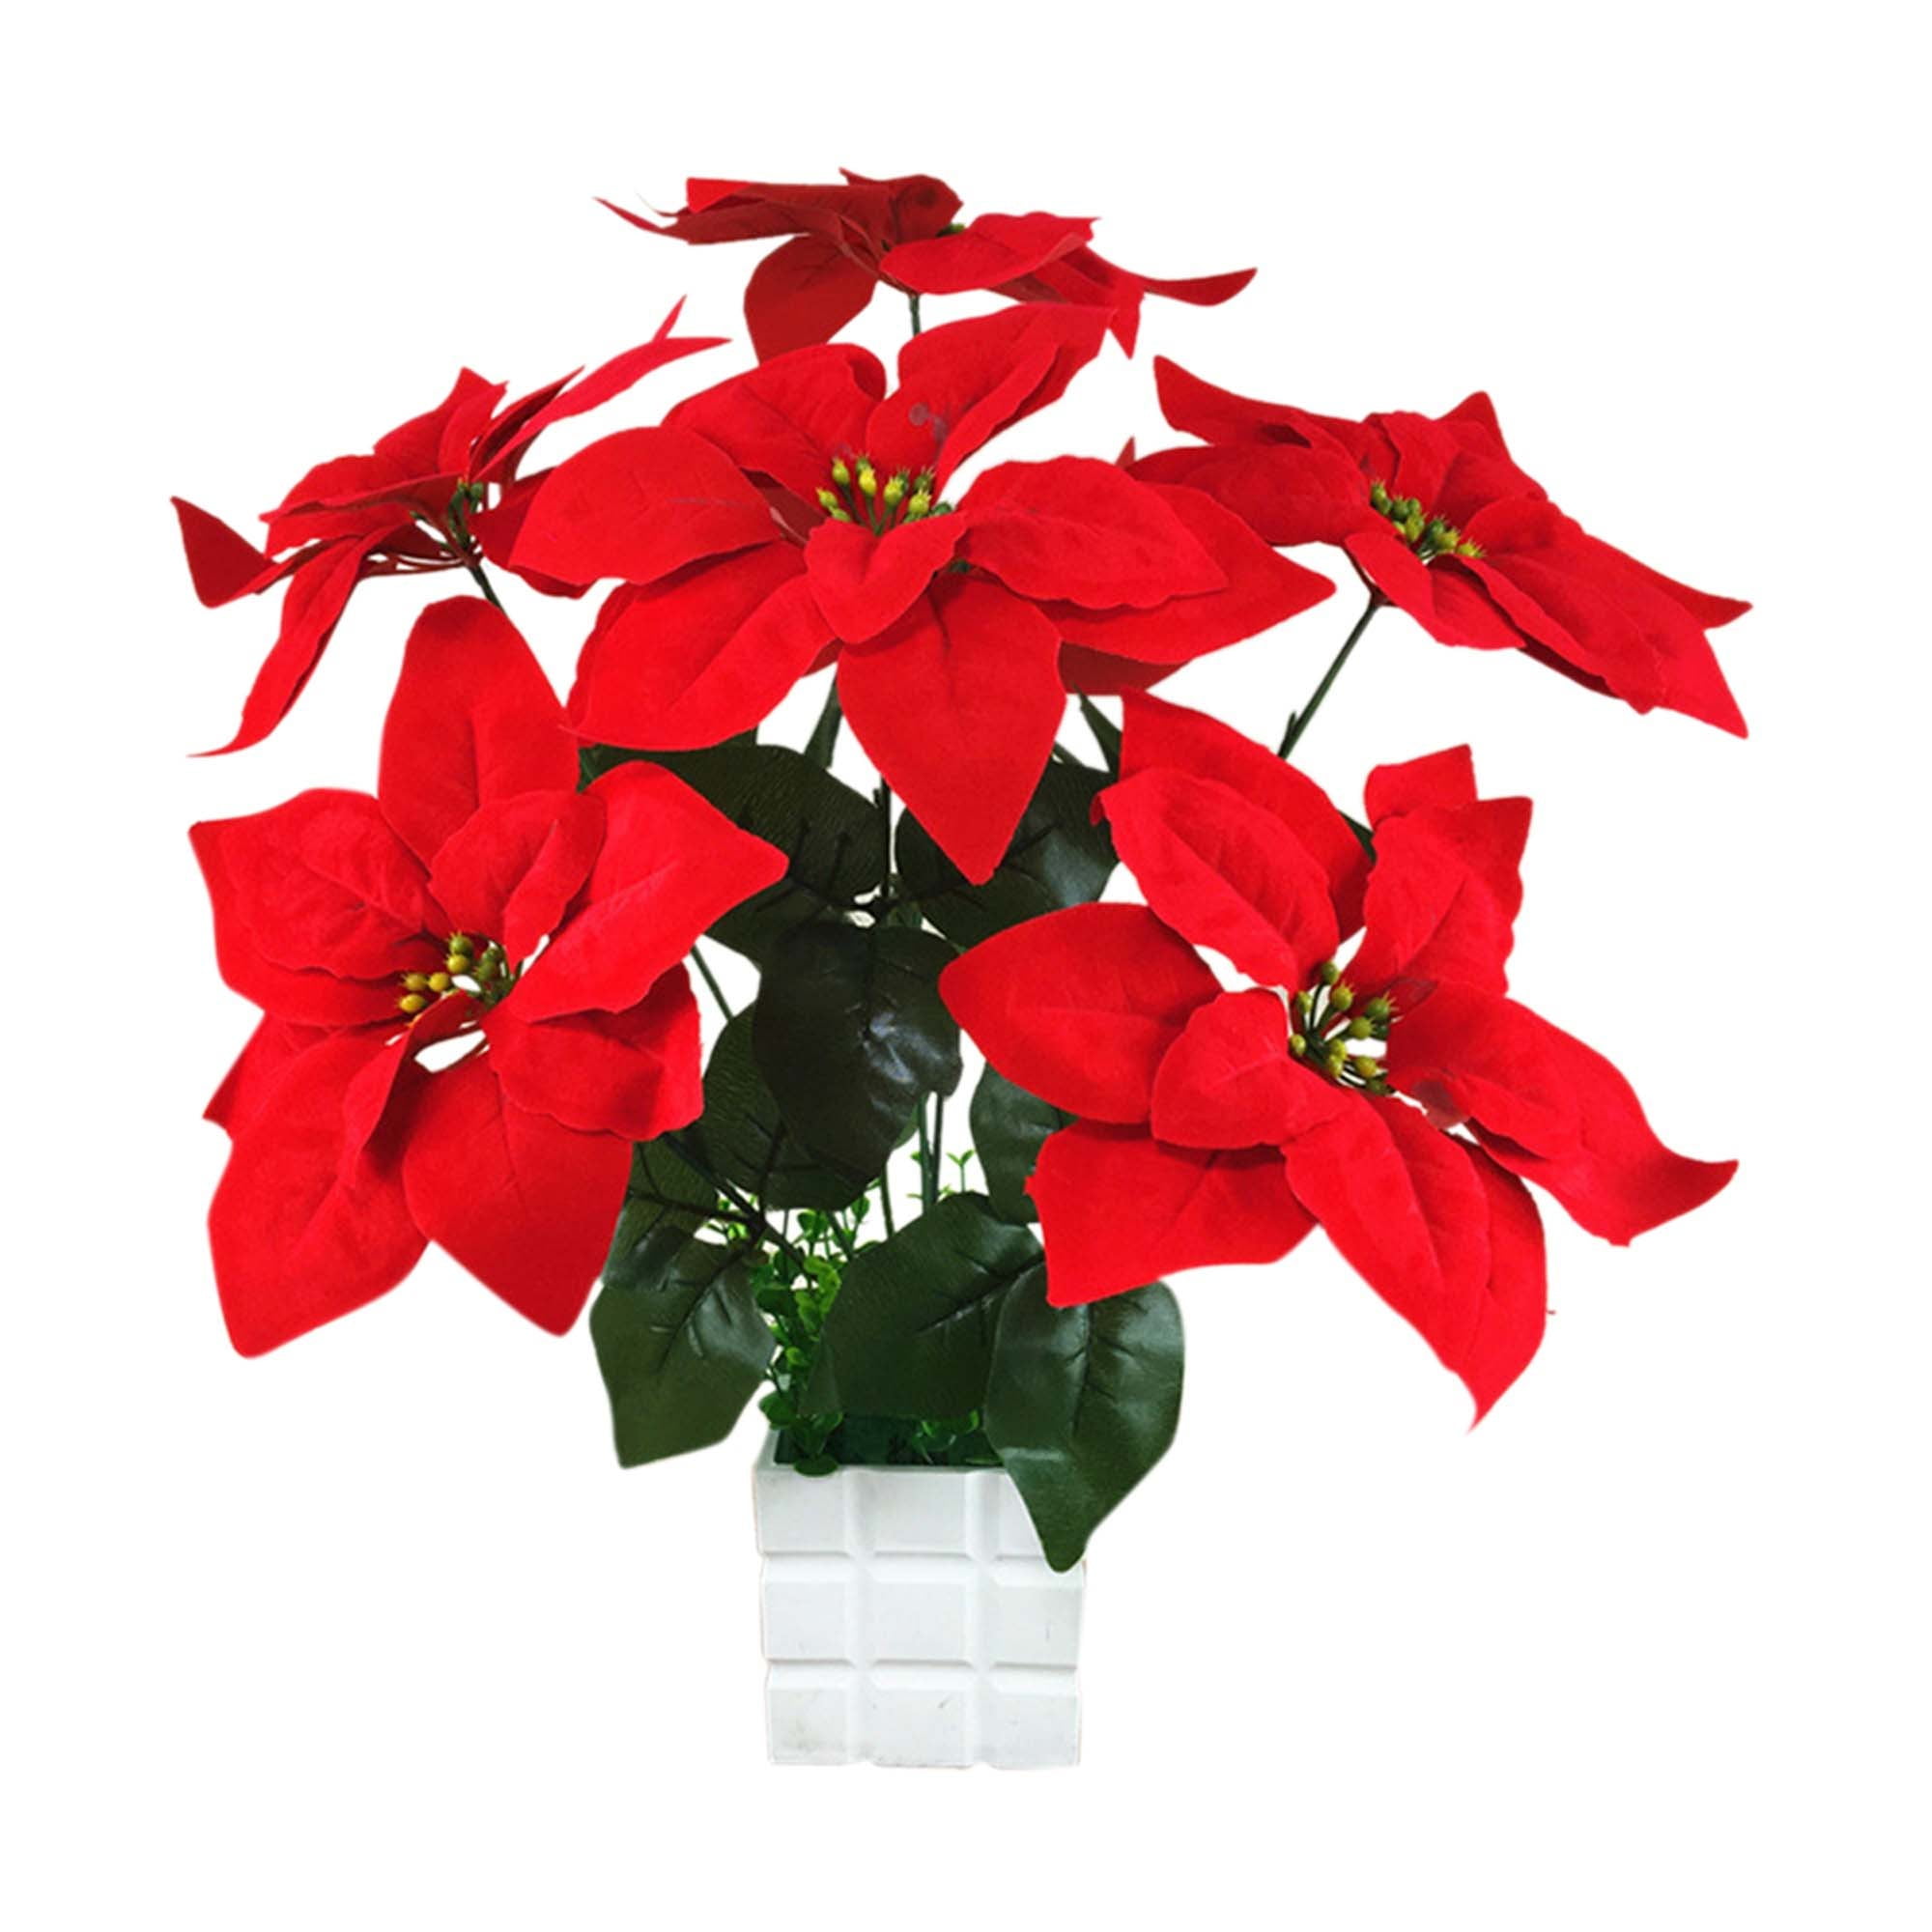 RED SOFT TOUCH POINSETTIA BUNCHES X 3 ARTIFICIAL SILK XMAS FLOWERS 